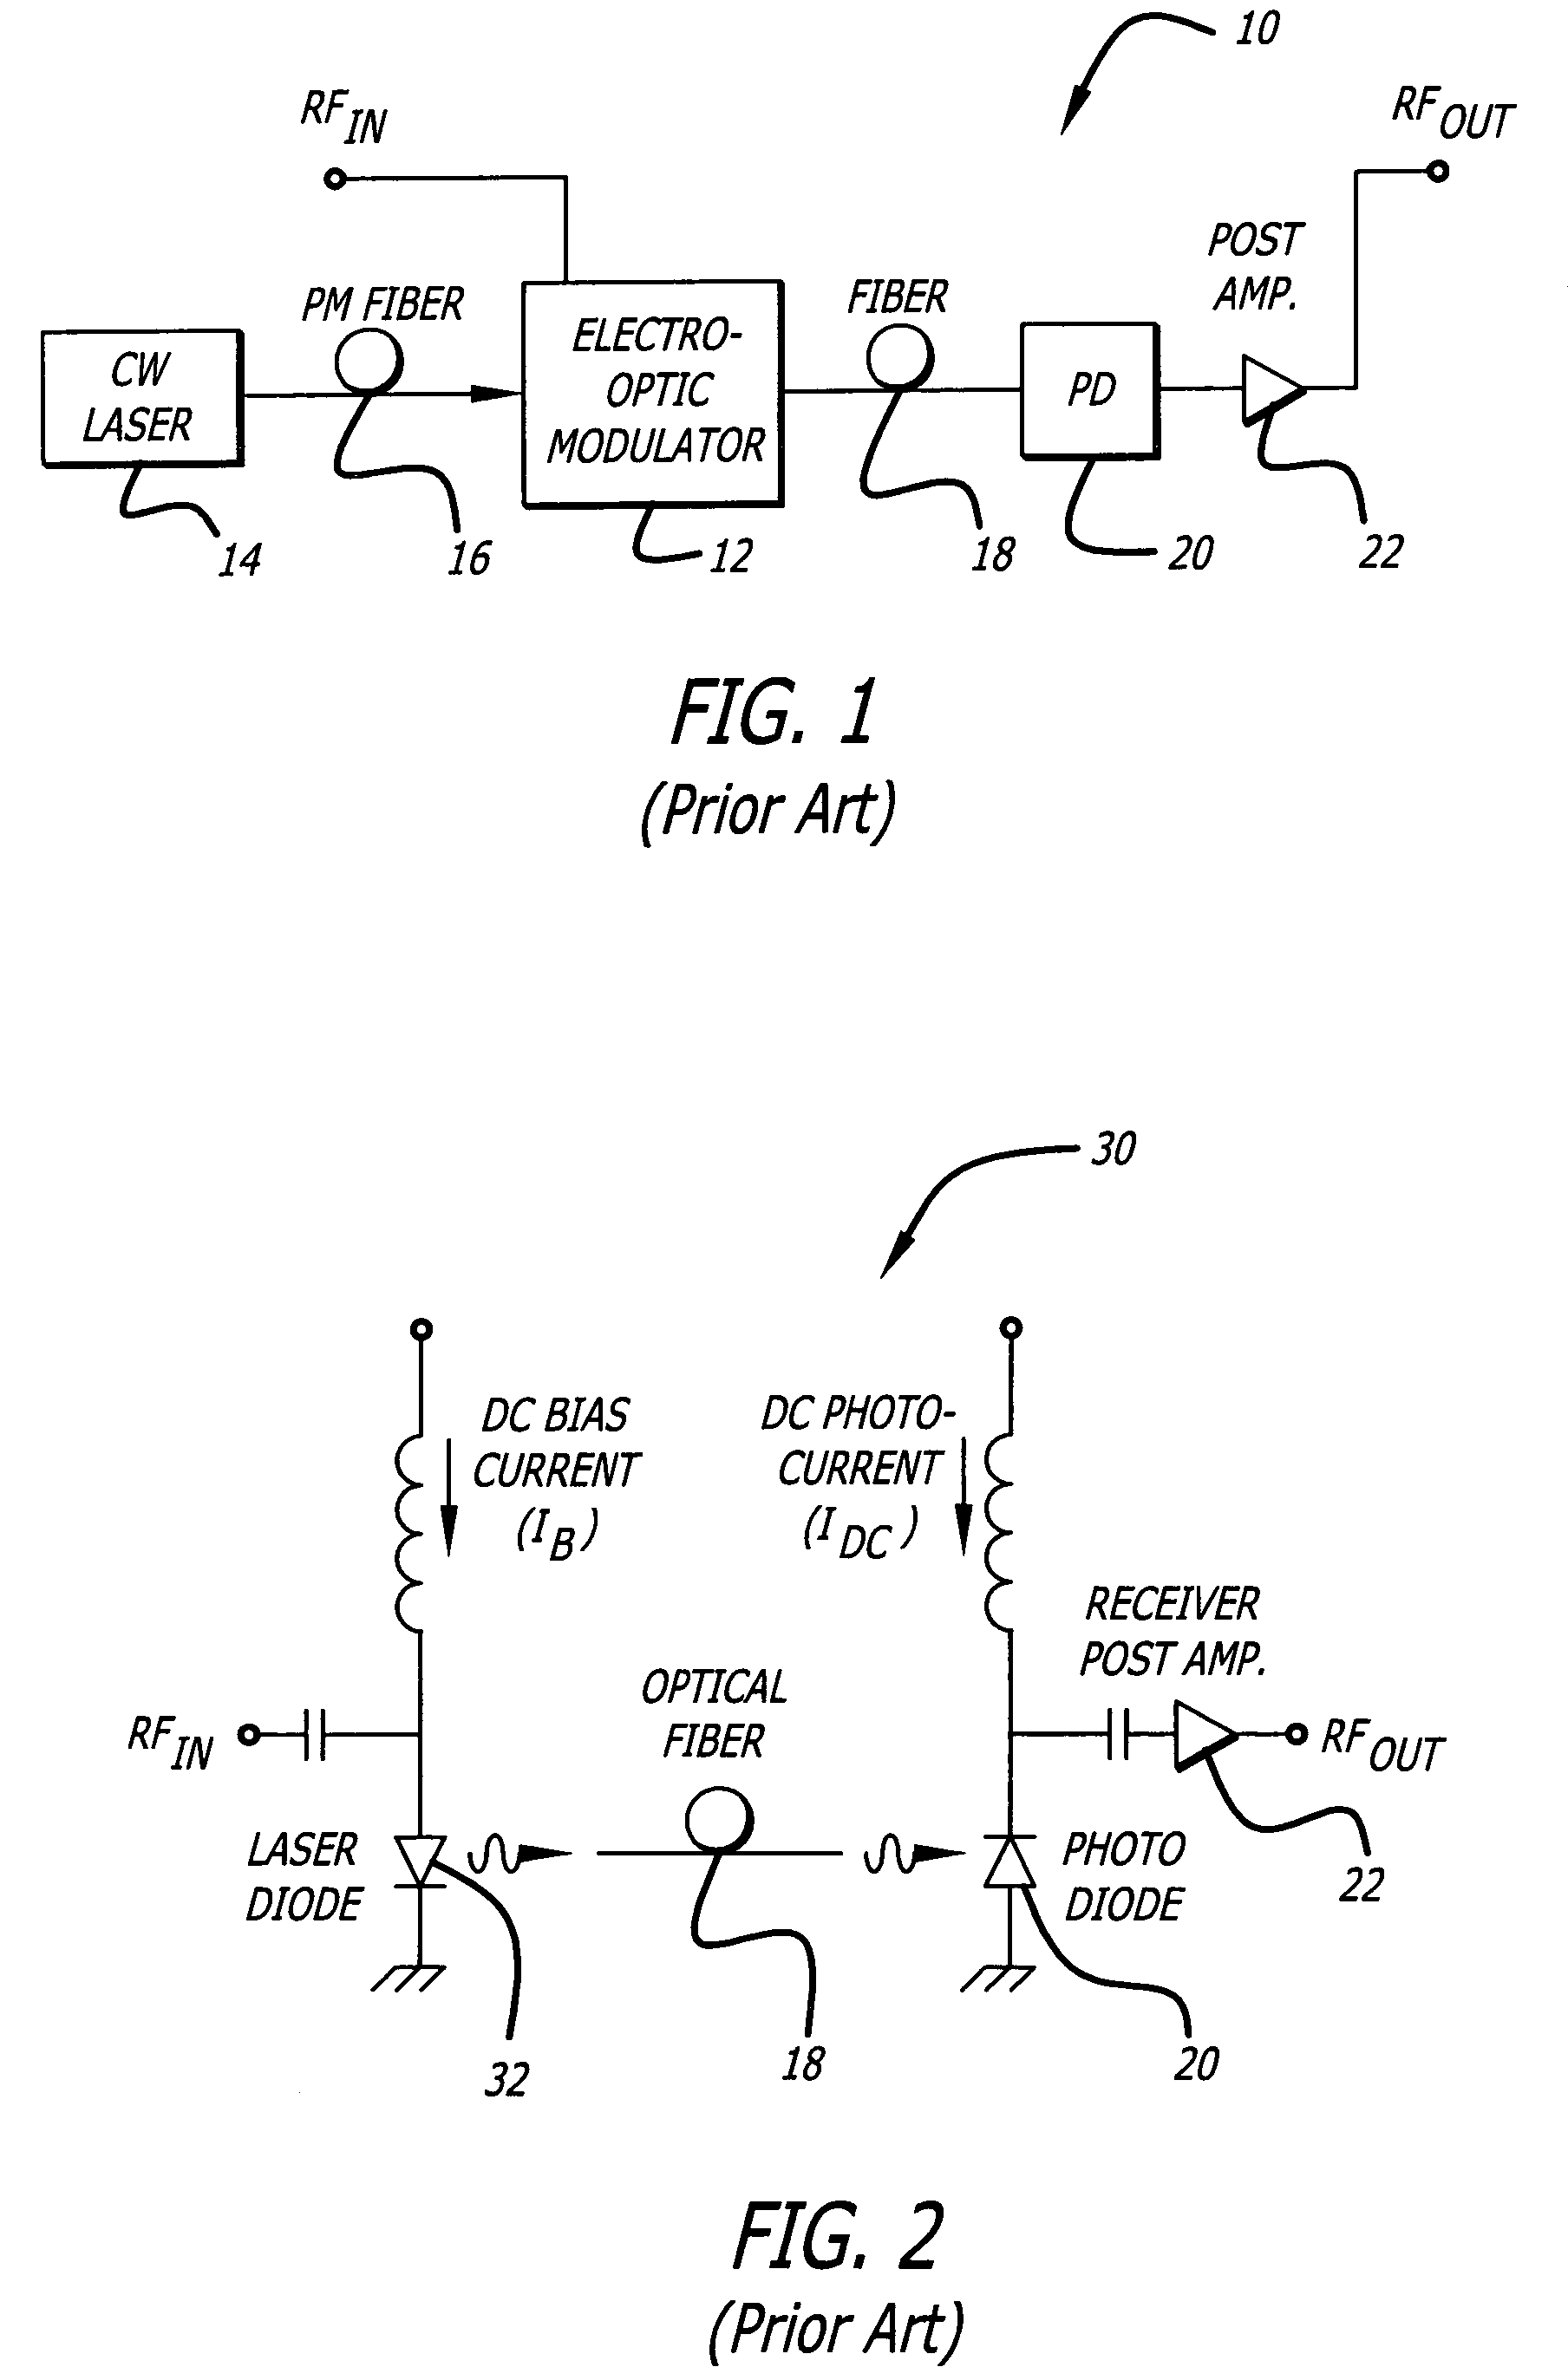 System and method for reducing interferometric distortion and relative intensity noise in directly modulated fiber optic links